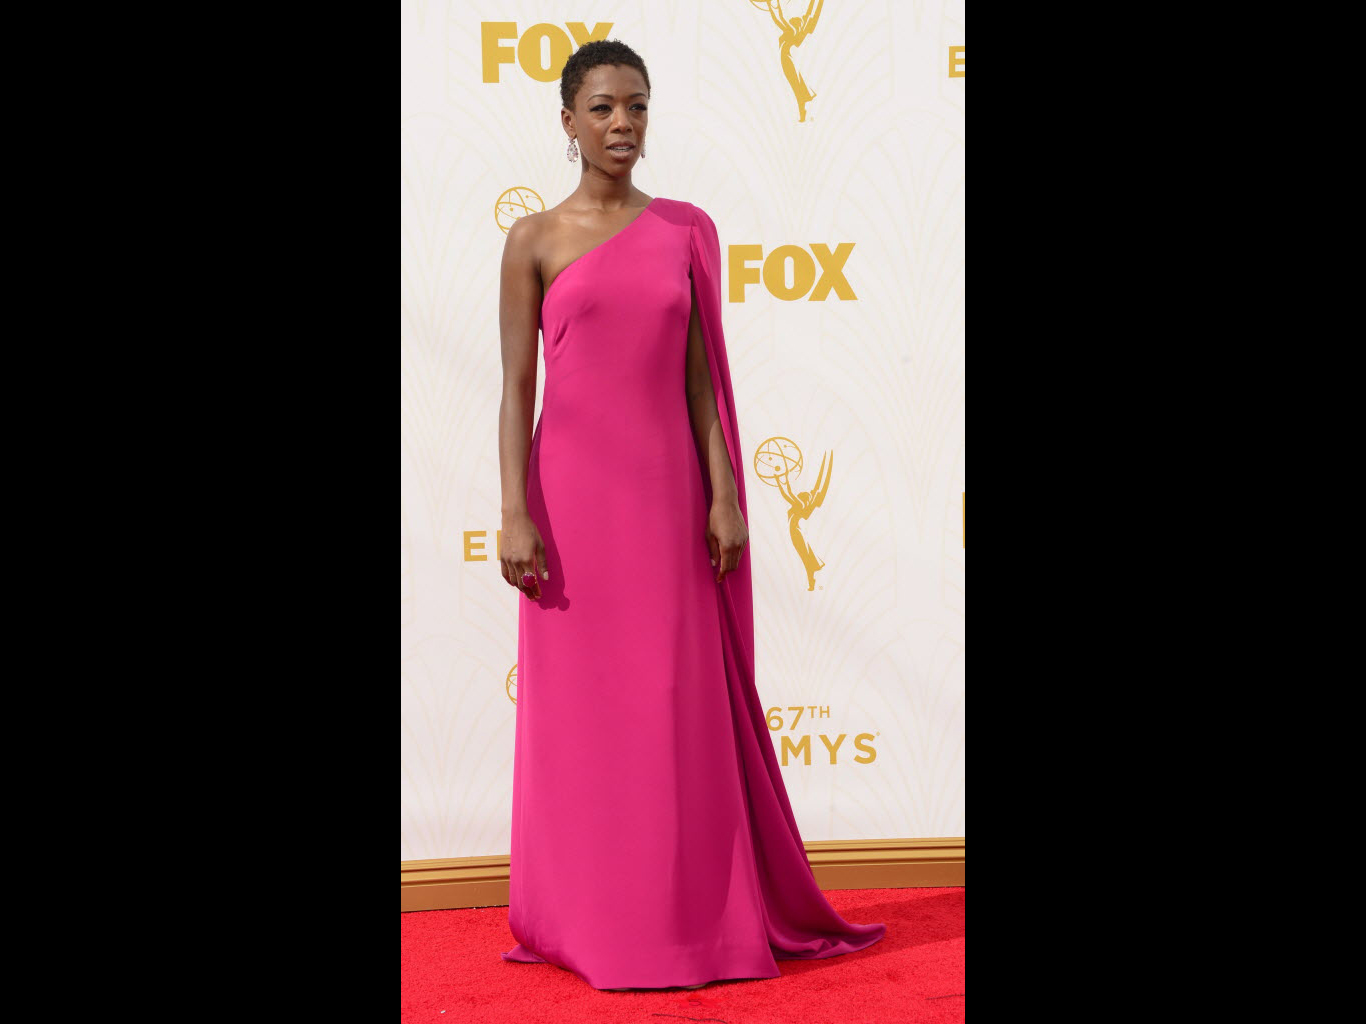 Best dressed: Samira Wiley looked sublime in a shocking pink cape dress. Photo: EPA